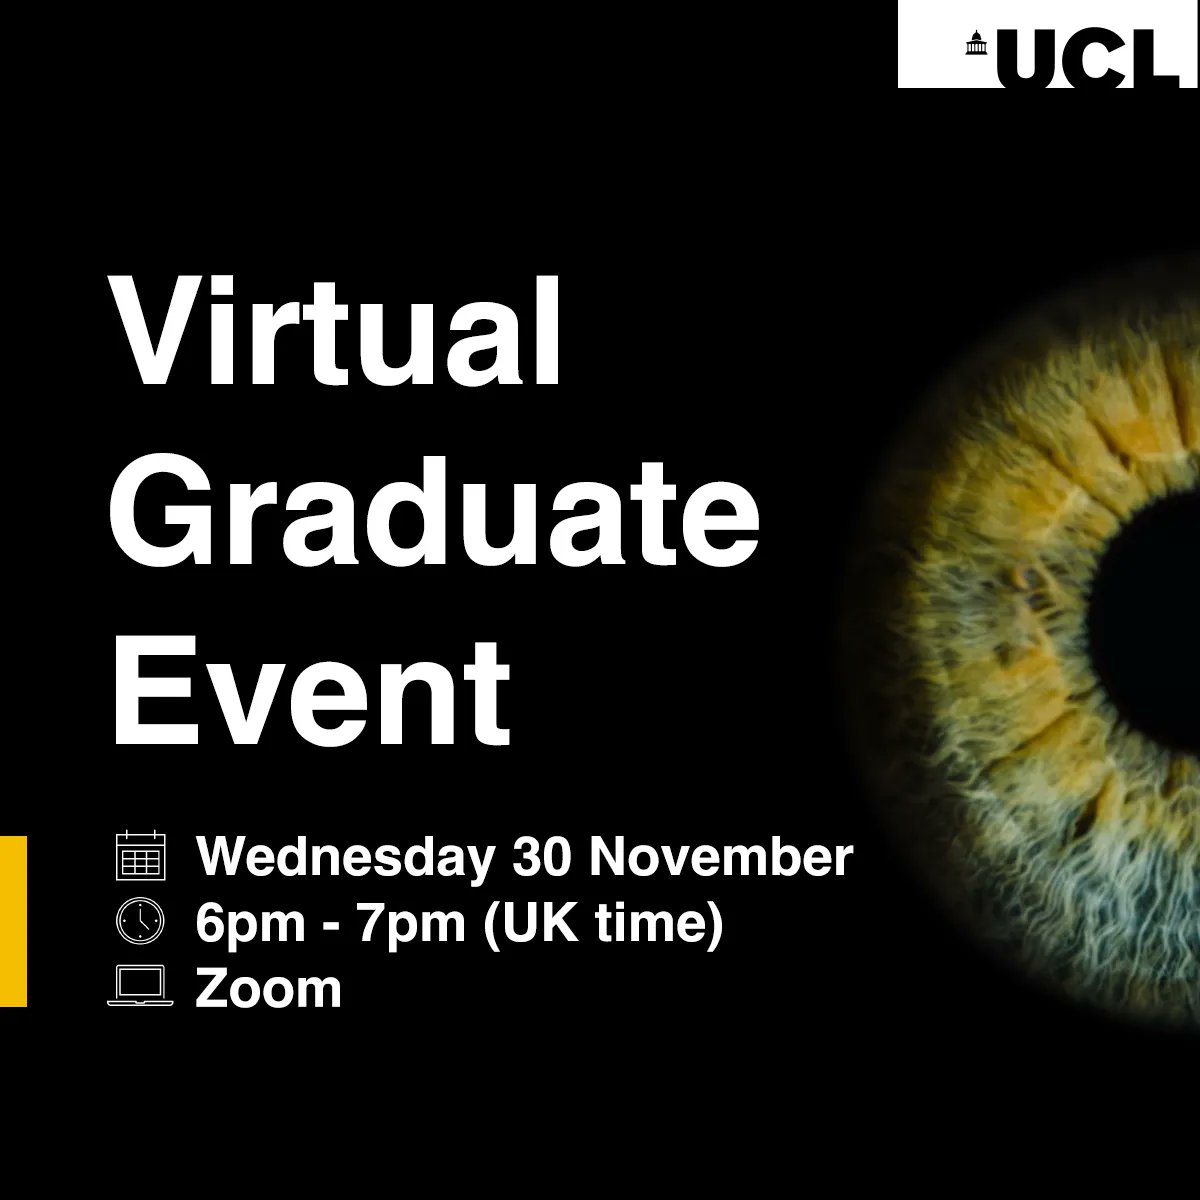 Want to learn more about the #Orthoptics (pre-registration) MSc programme taught @UCLeye? Bookings are open for our Virtual Graduate Open Day. Hear from programme directors about this fast-track course to become an orthoptist. Book your place here: bit.ly/3Dt53BF